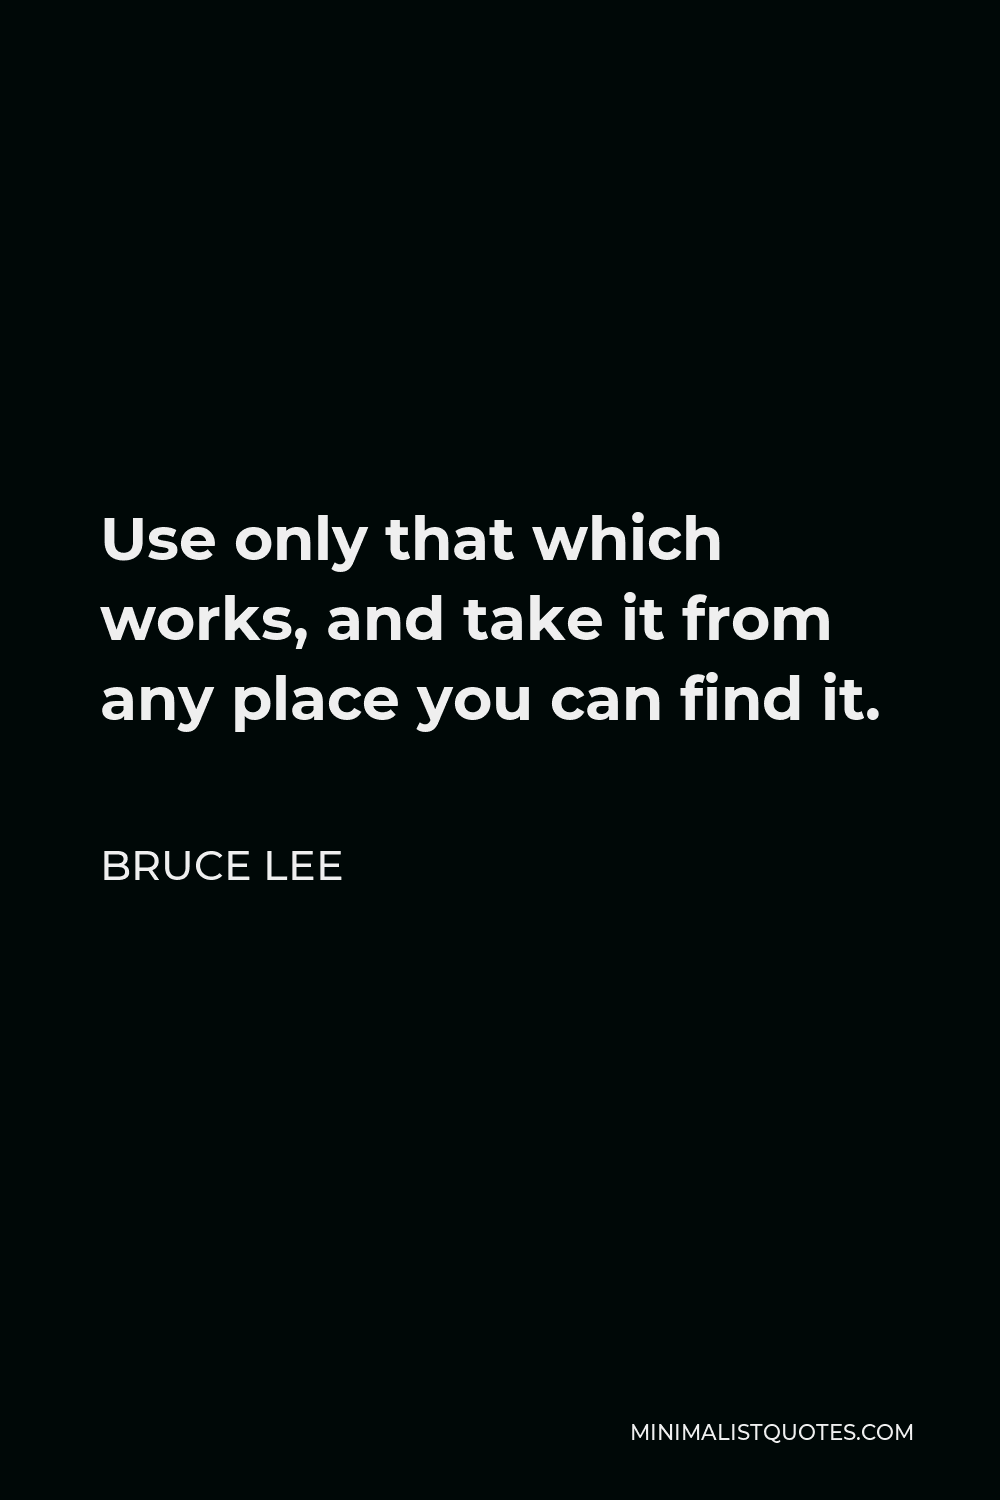 Bruce Lee Quote: Use only that which works, and take it from any place ...